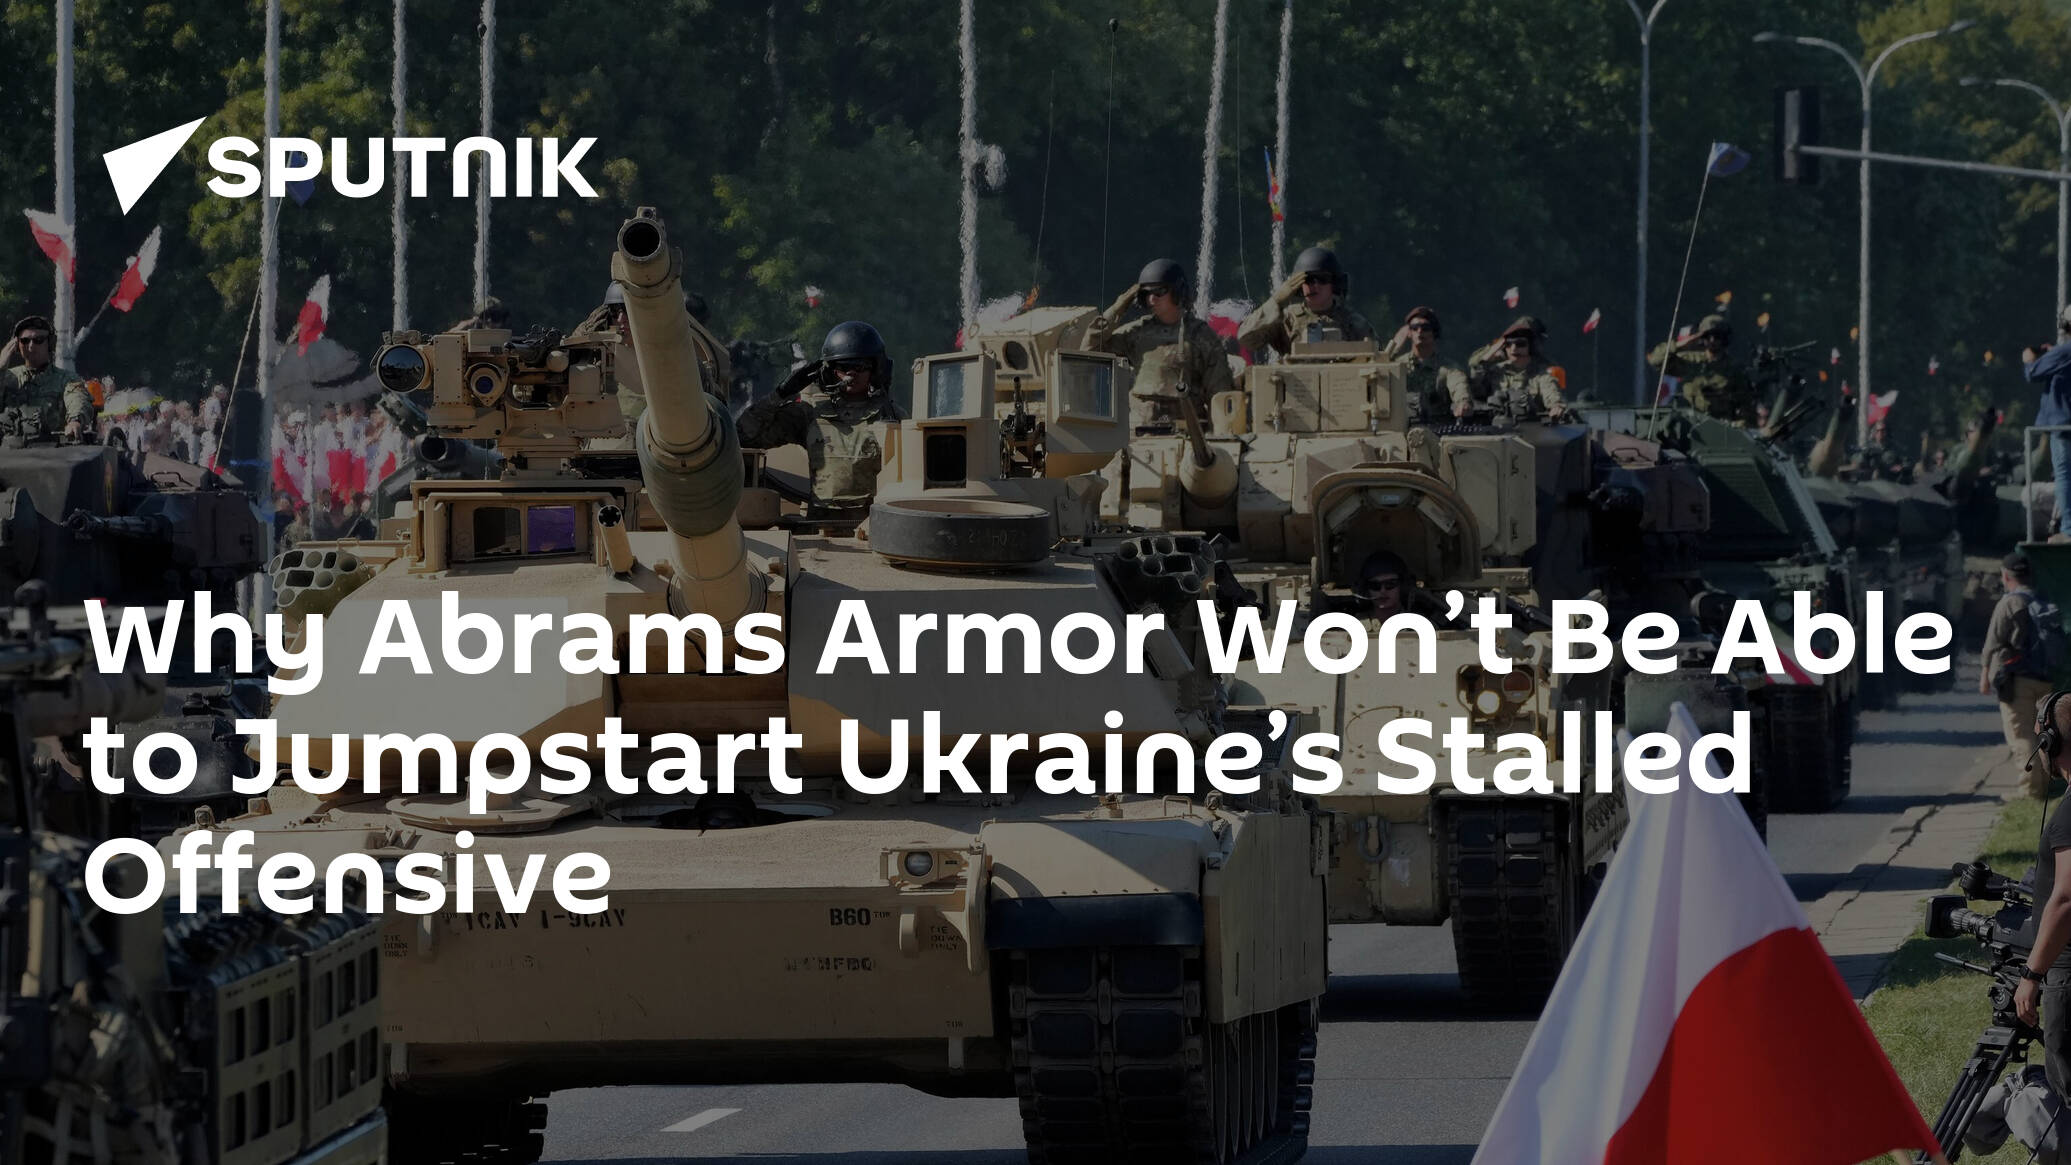 Why Abrams Armor Won’t Be Able to Jumpstart Ukraine’s Stalled Offensive